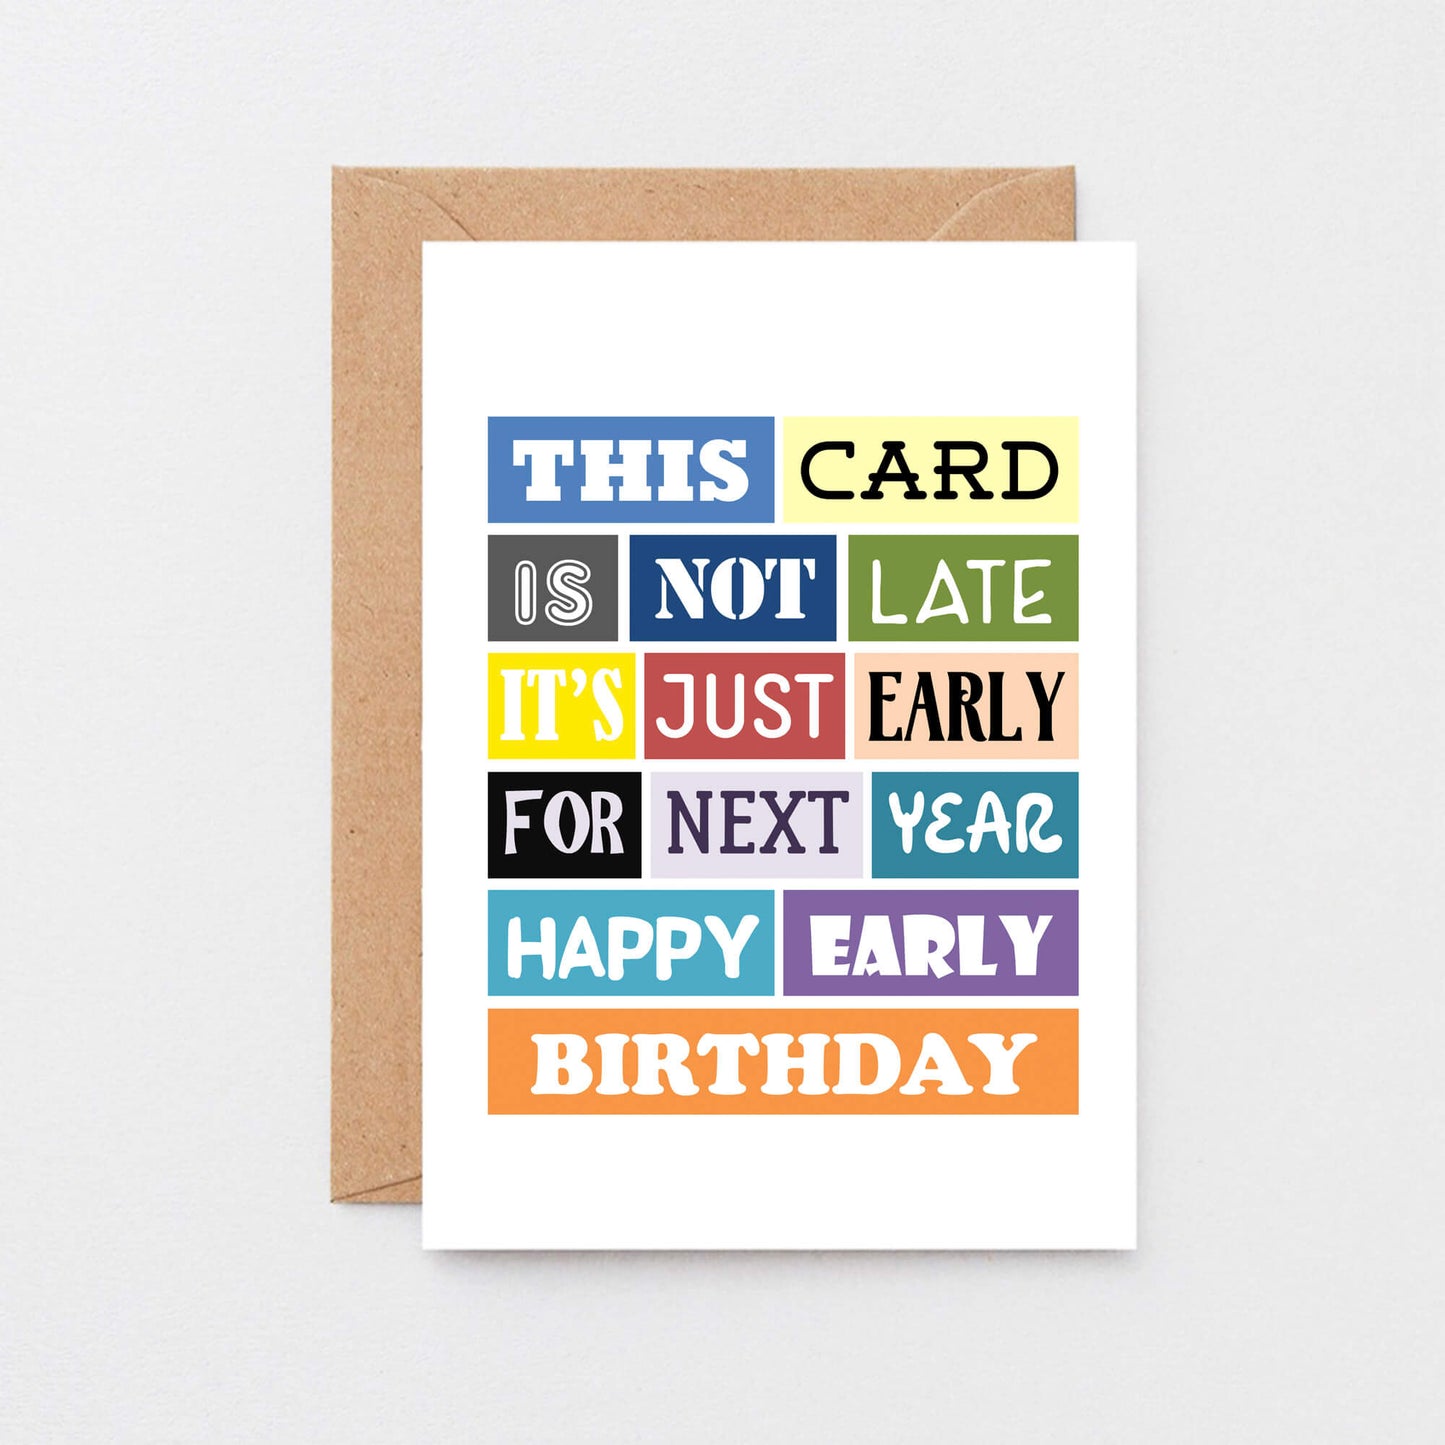 Belated Birthday Card by SixElevenCreations. Reads This card is not late. It's just early for next year. Happy early birthday. Product Code SE0057A6